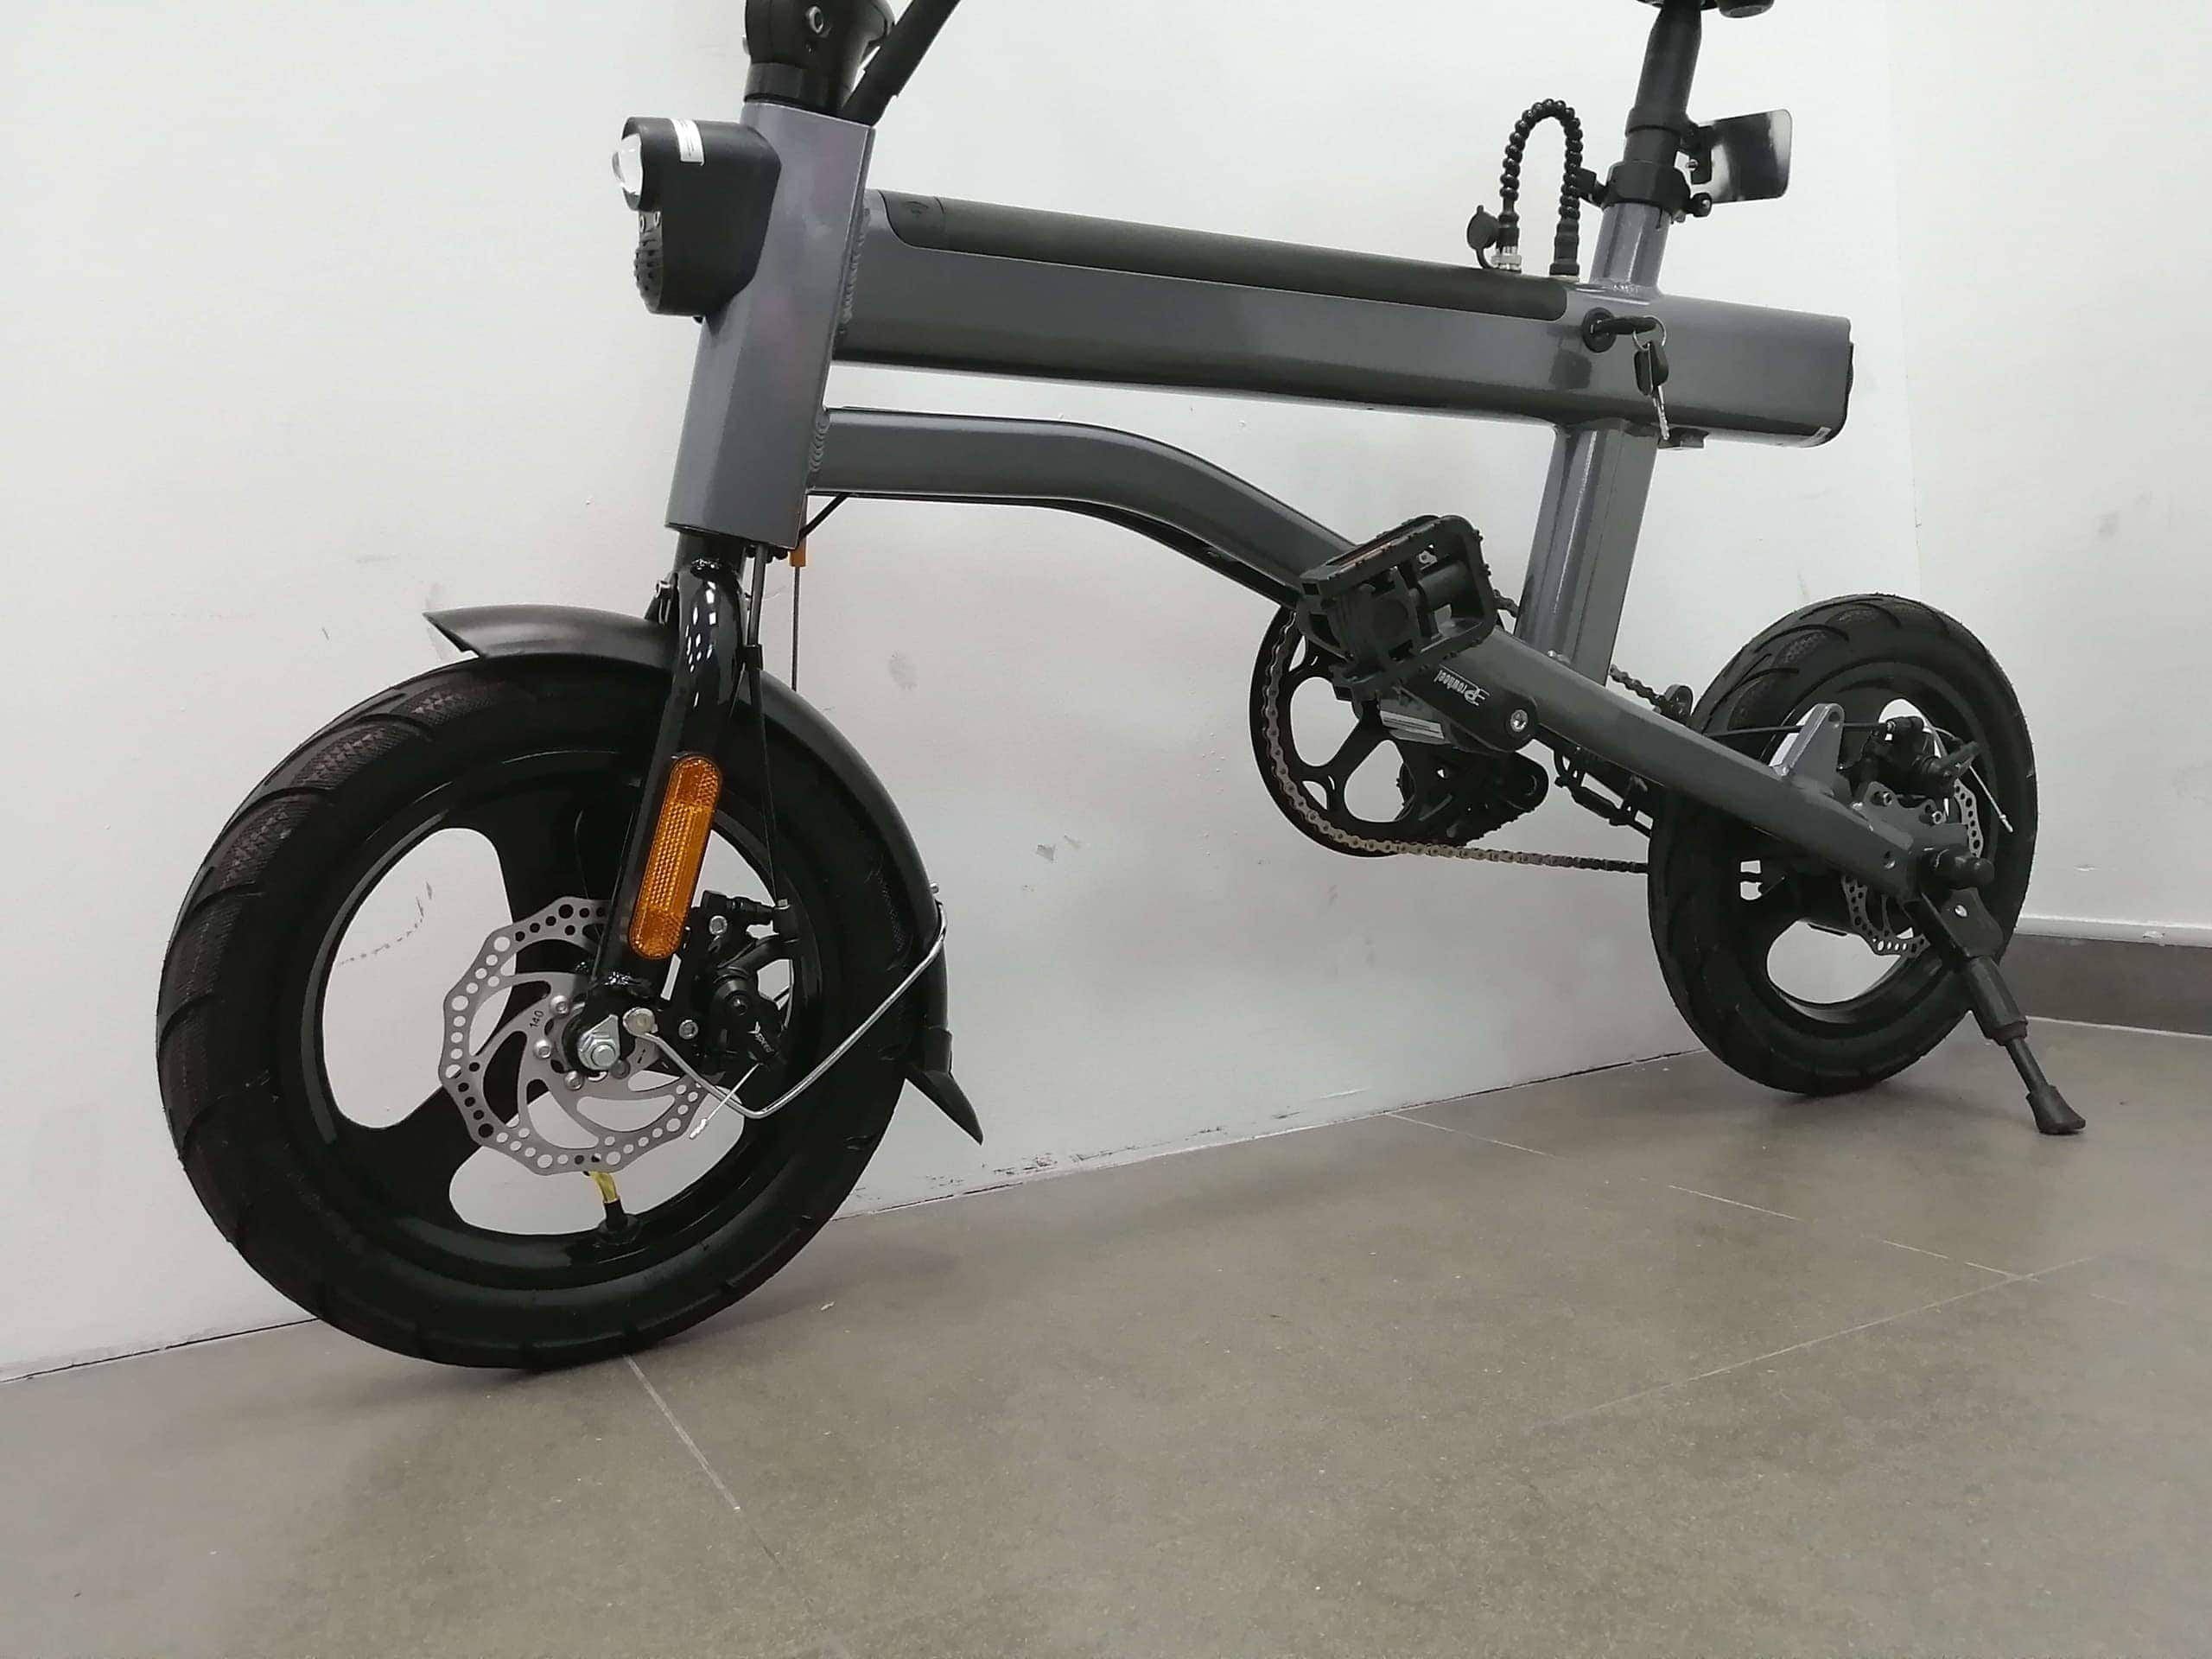 JI MOVE LTA approved ebike dual disc brakes scaled - Review of JI-MOVE LC, the most compact LTA approved ebike?